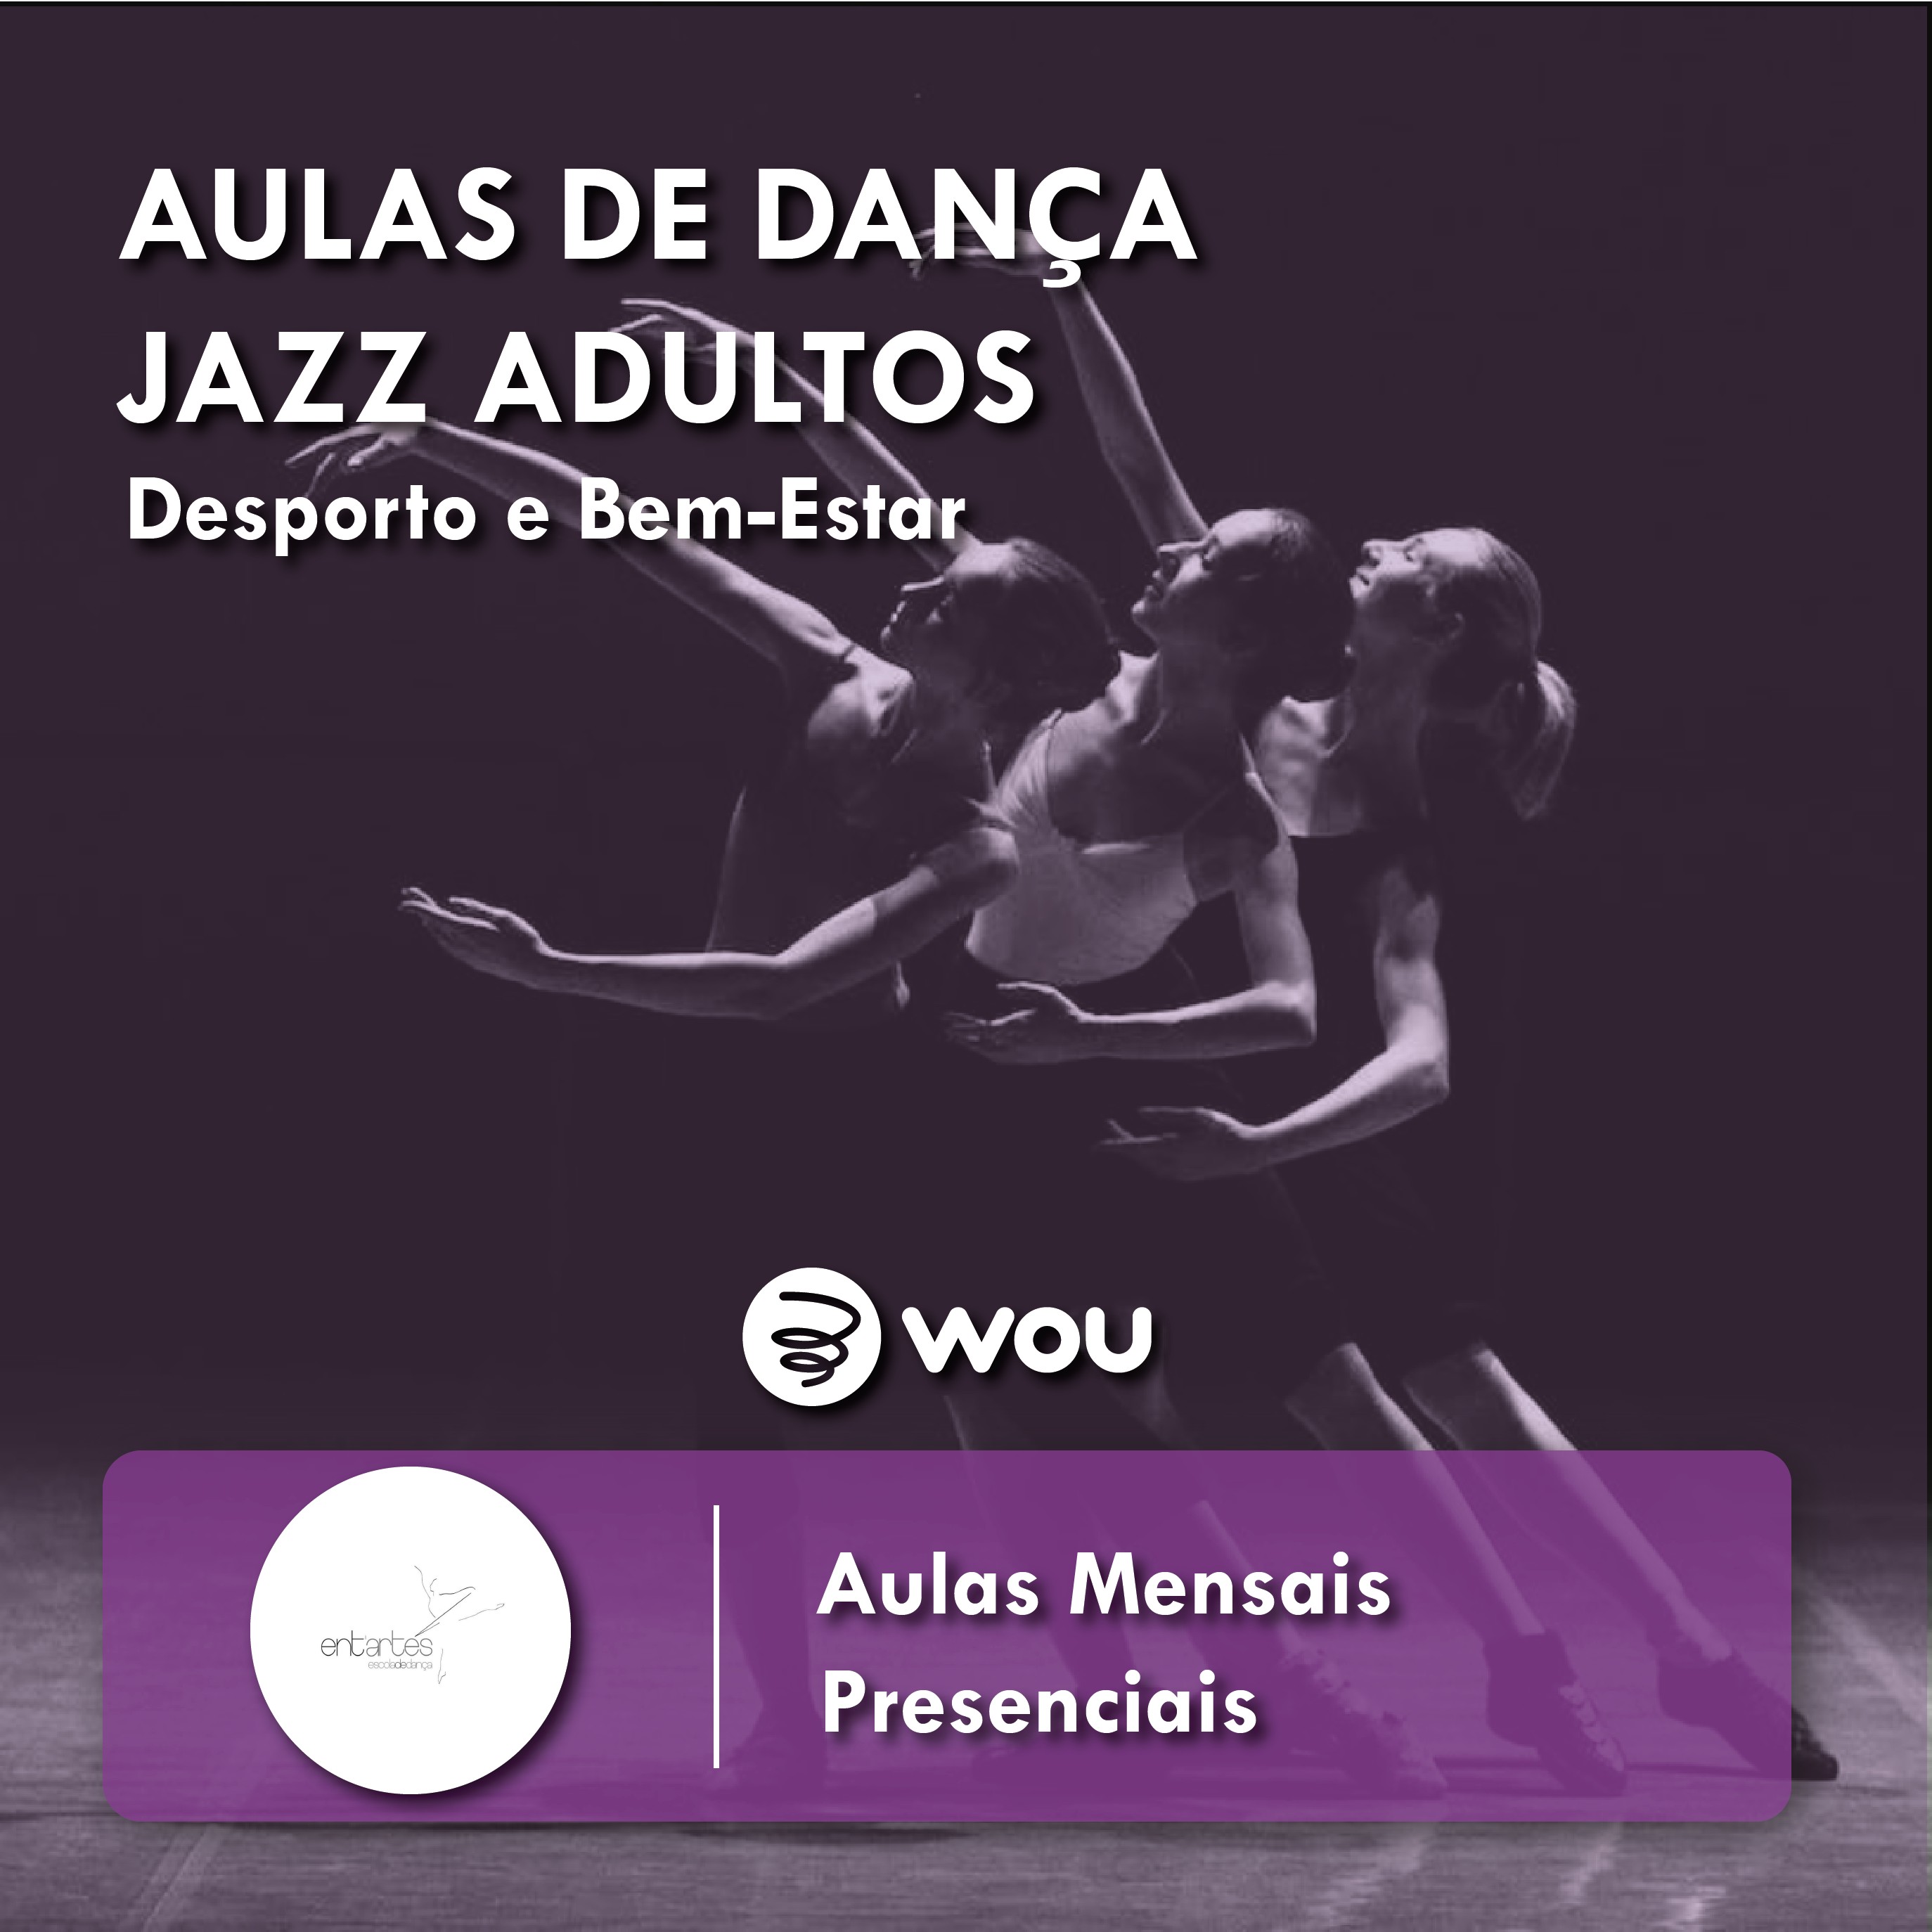 Jazz Dance Classes for Adults in Braga